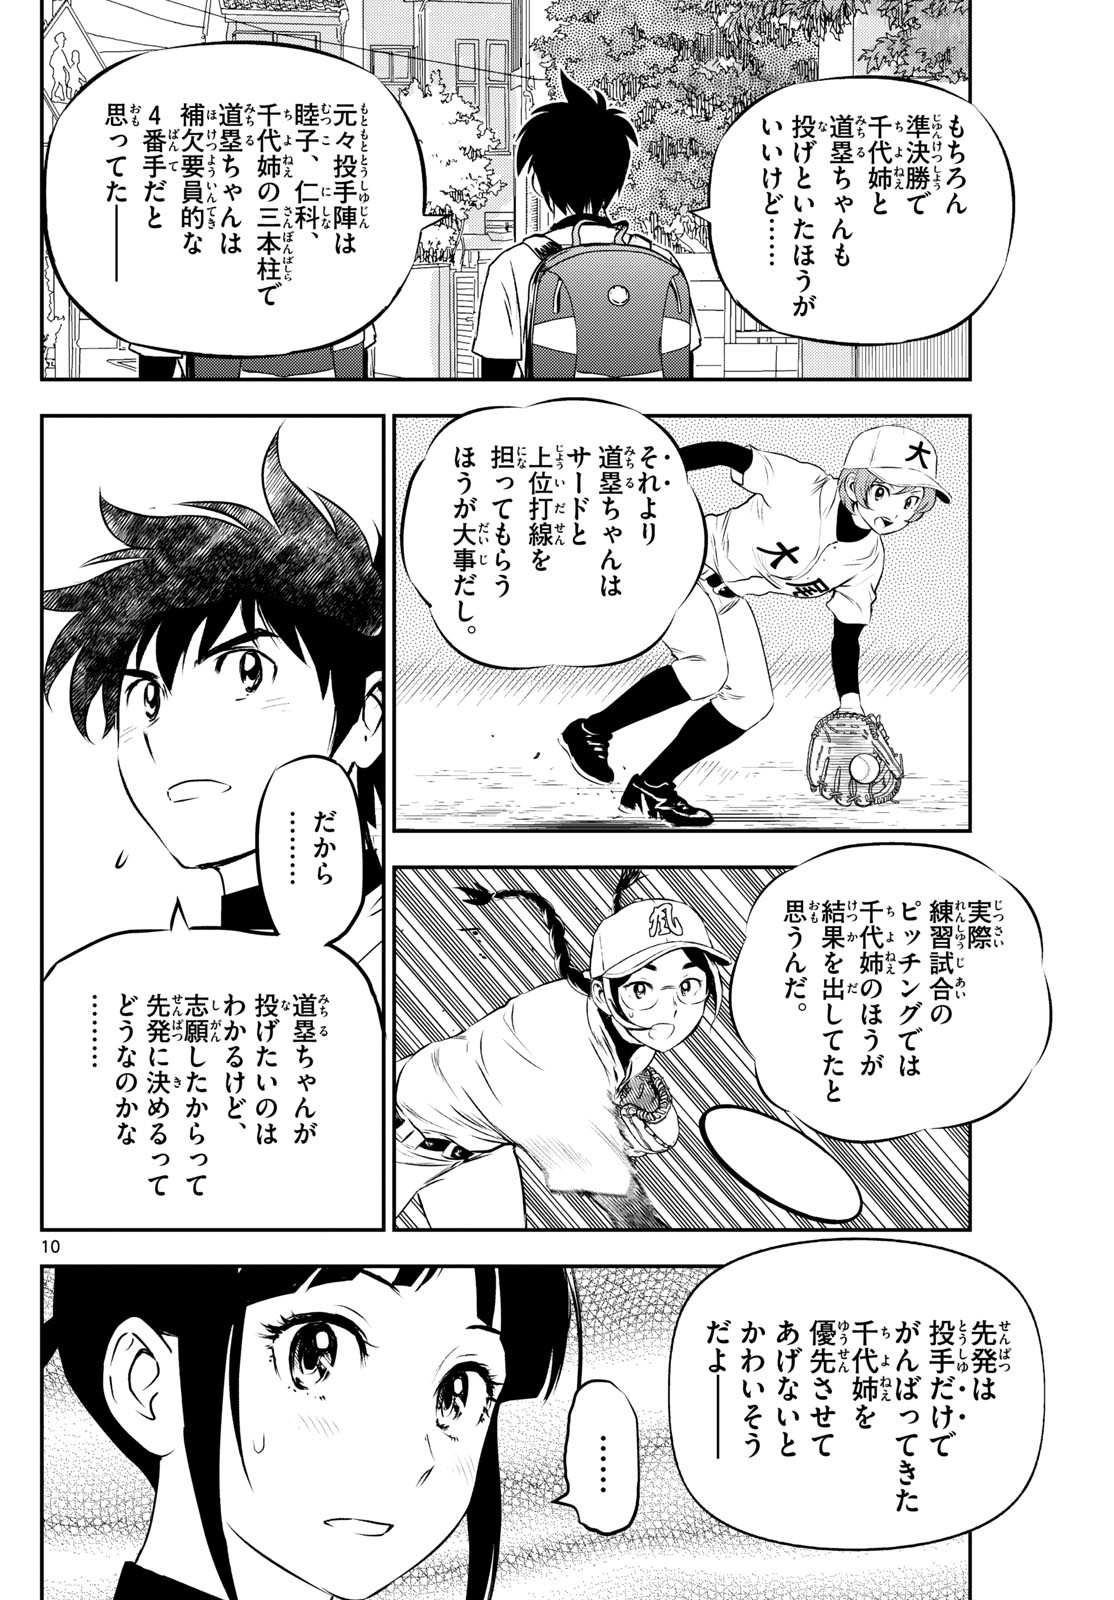 Major 2nd - メジャーセカンド - Chapter 278 - Page 10